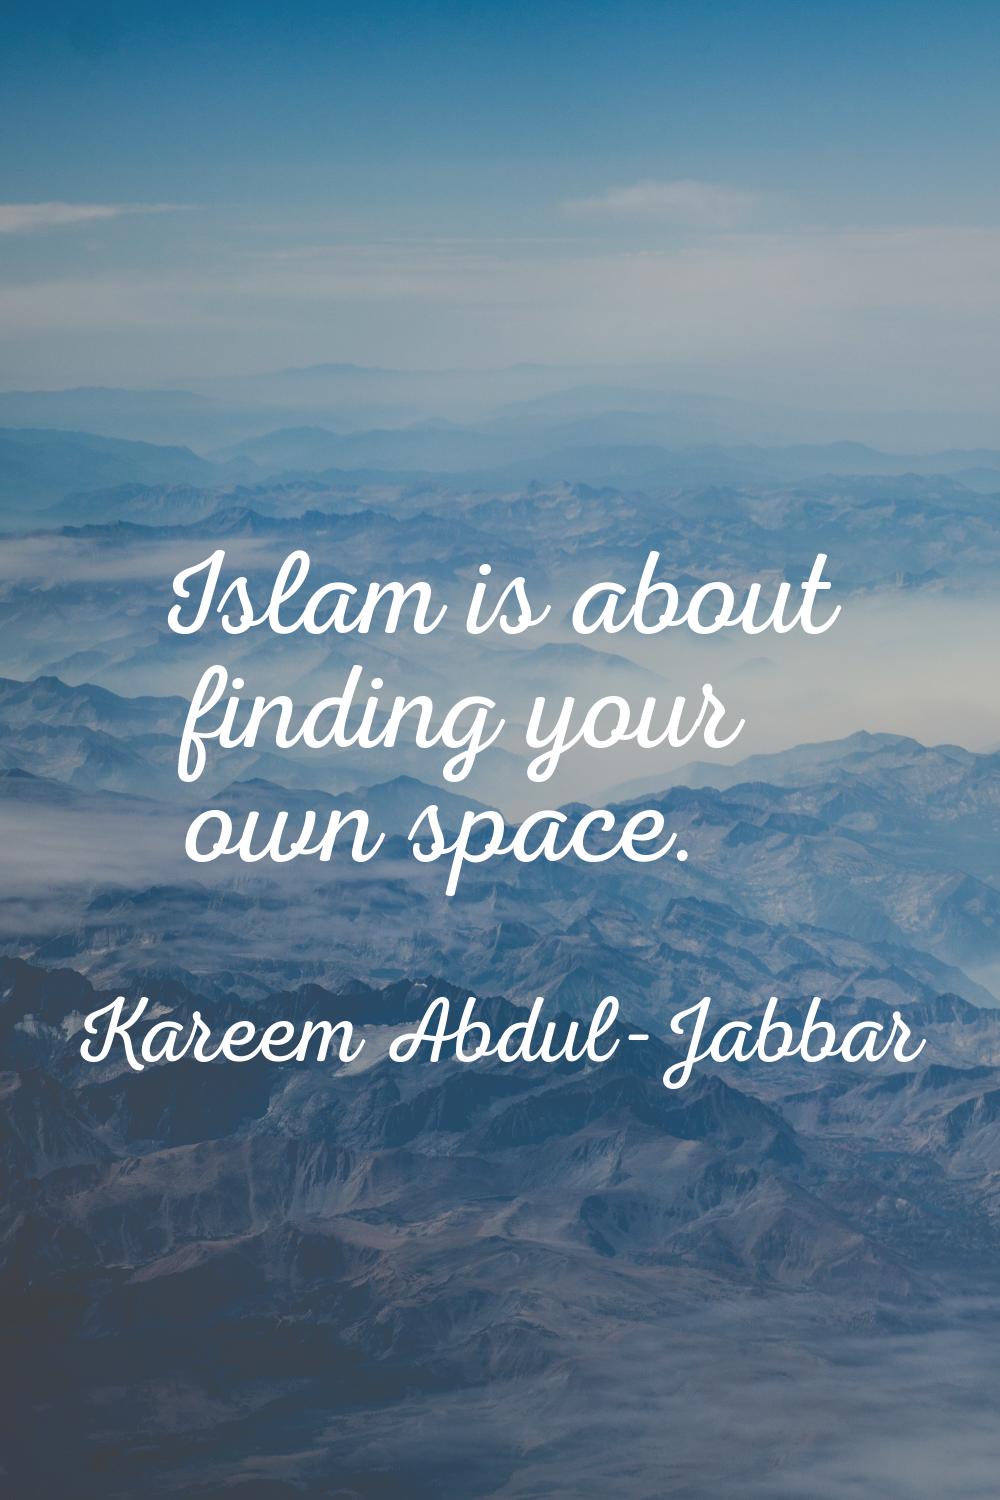 Islam is about finding your own space.